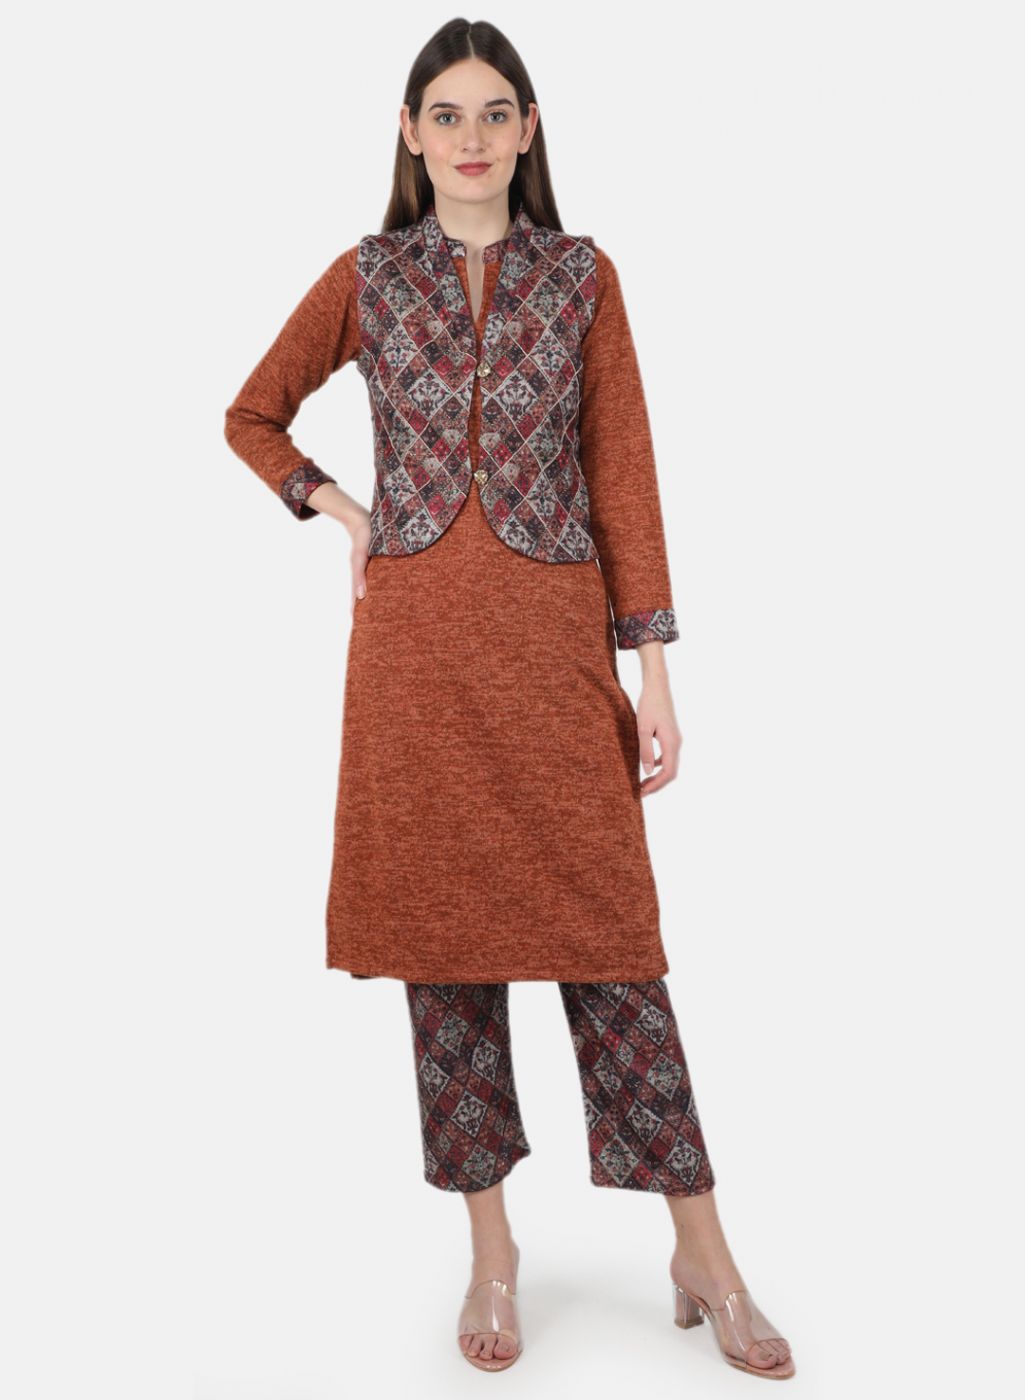 Winter Dresses Online - Buy Women Kurtis, Cardigans, Knitted Tops, Kaftans,  Sweaters, Jackets, Coats, Stoles, … | Stylish ponchos, India clothes,  Embroidered kurti